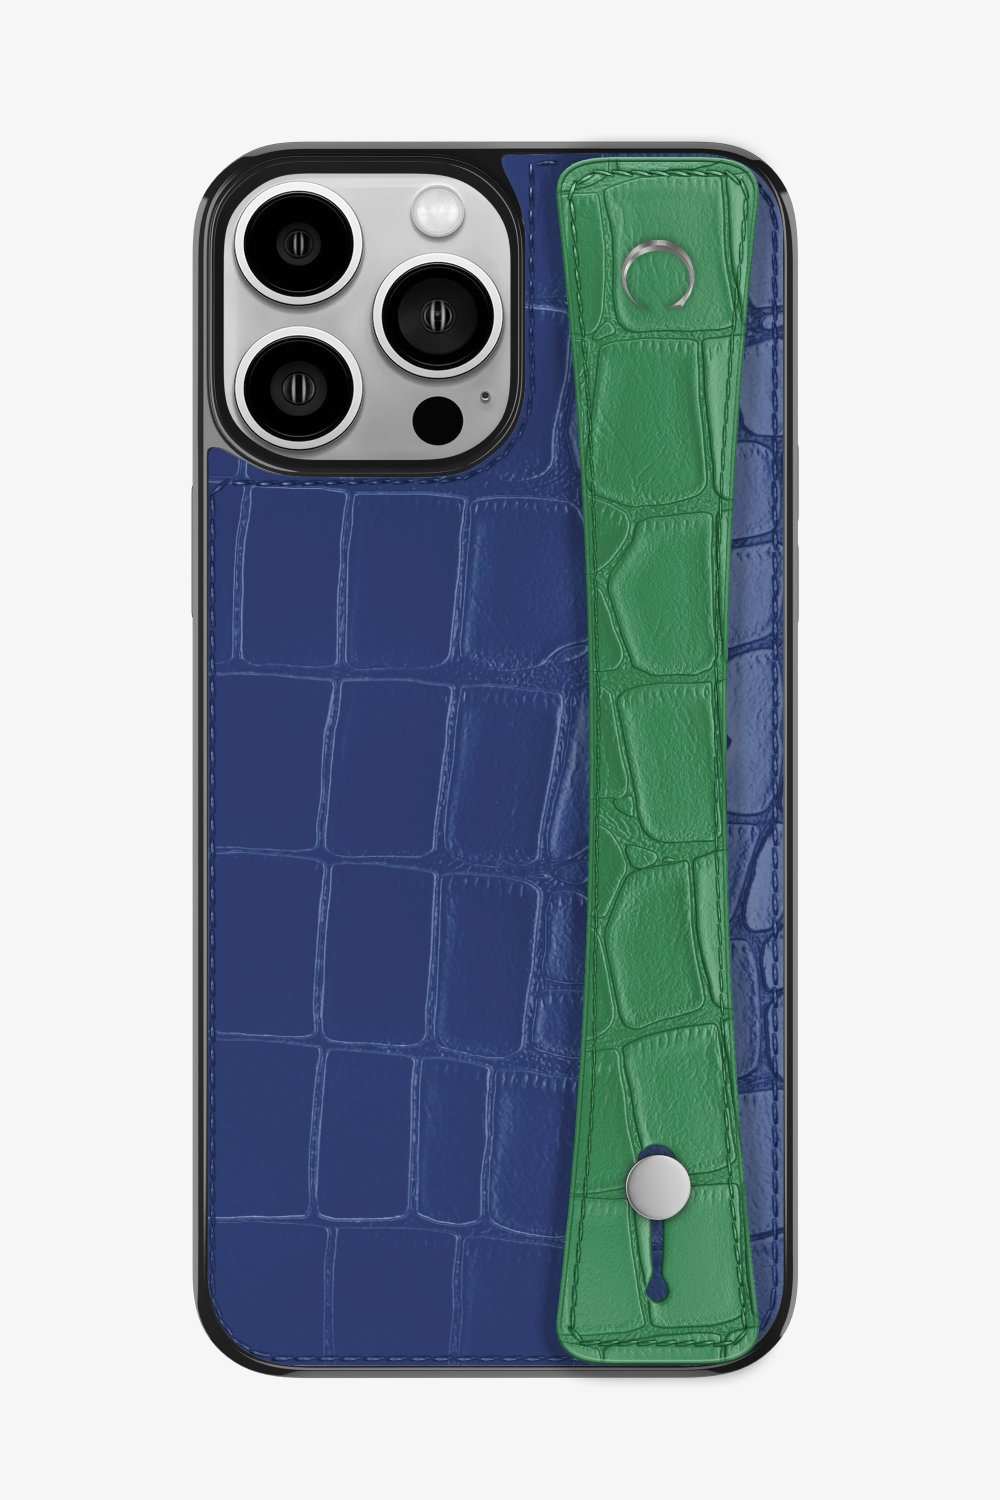 Alligator Sports Strap Case for iPhone 15 Pro Max - Navy Blue / Green Emerald - zollofrance